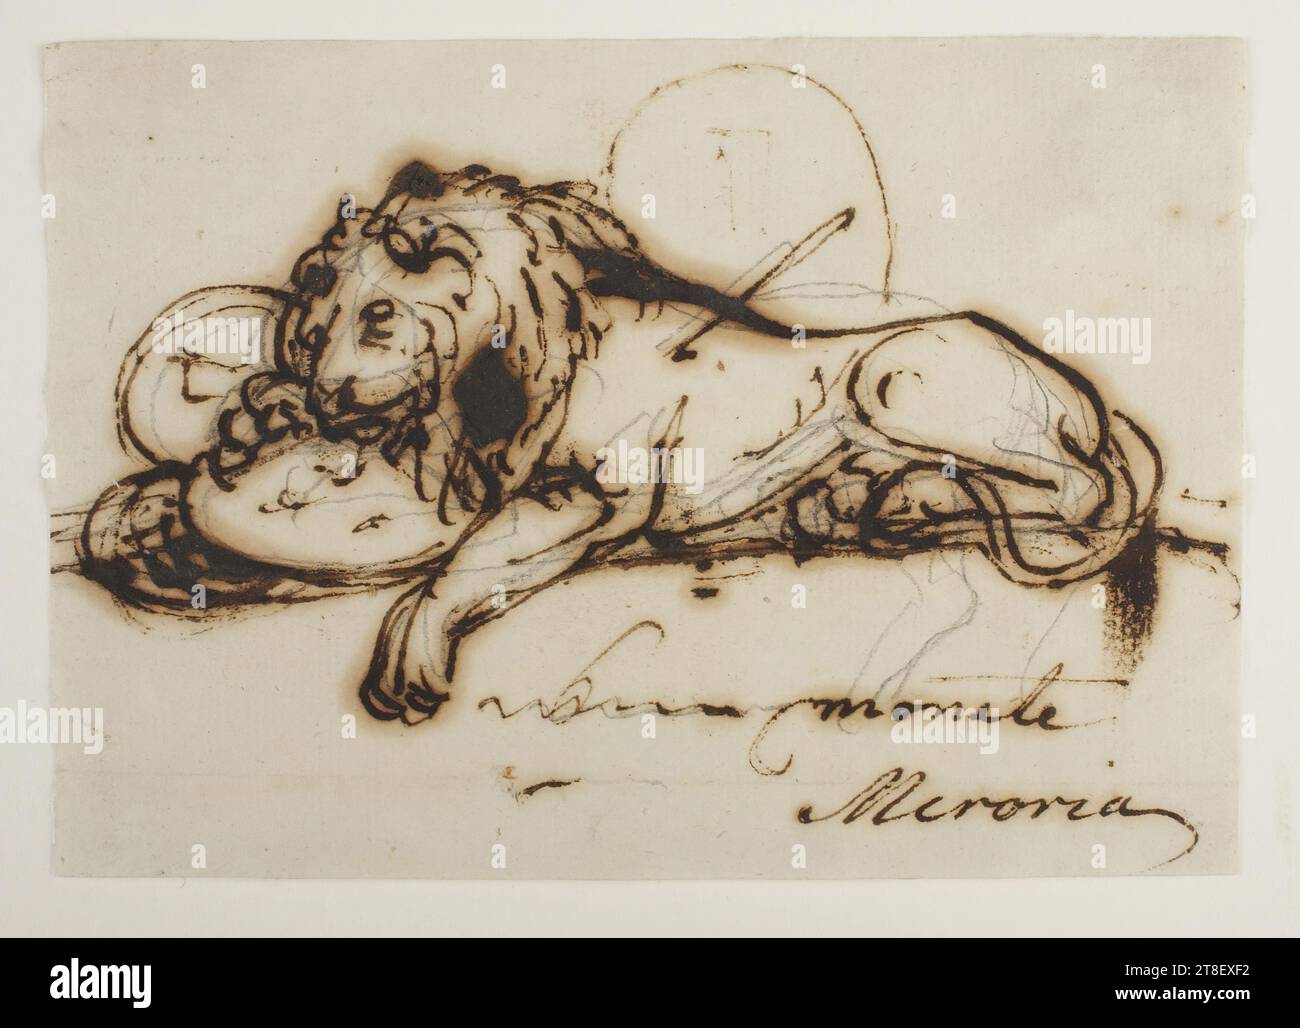 Dying Lion (The Lucerne Lion), Bertel Thorvaldsen, 1770-1844, 1818, Drawing, Paper, Color, Ink, Color, Graphite, Drawn, Height 92 mm, Width 132 mm, monete, Meroria, Draftsmanship, Drawing, European, Modernity (1800 - 1914 Stock Photo